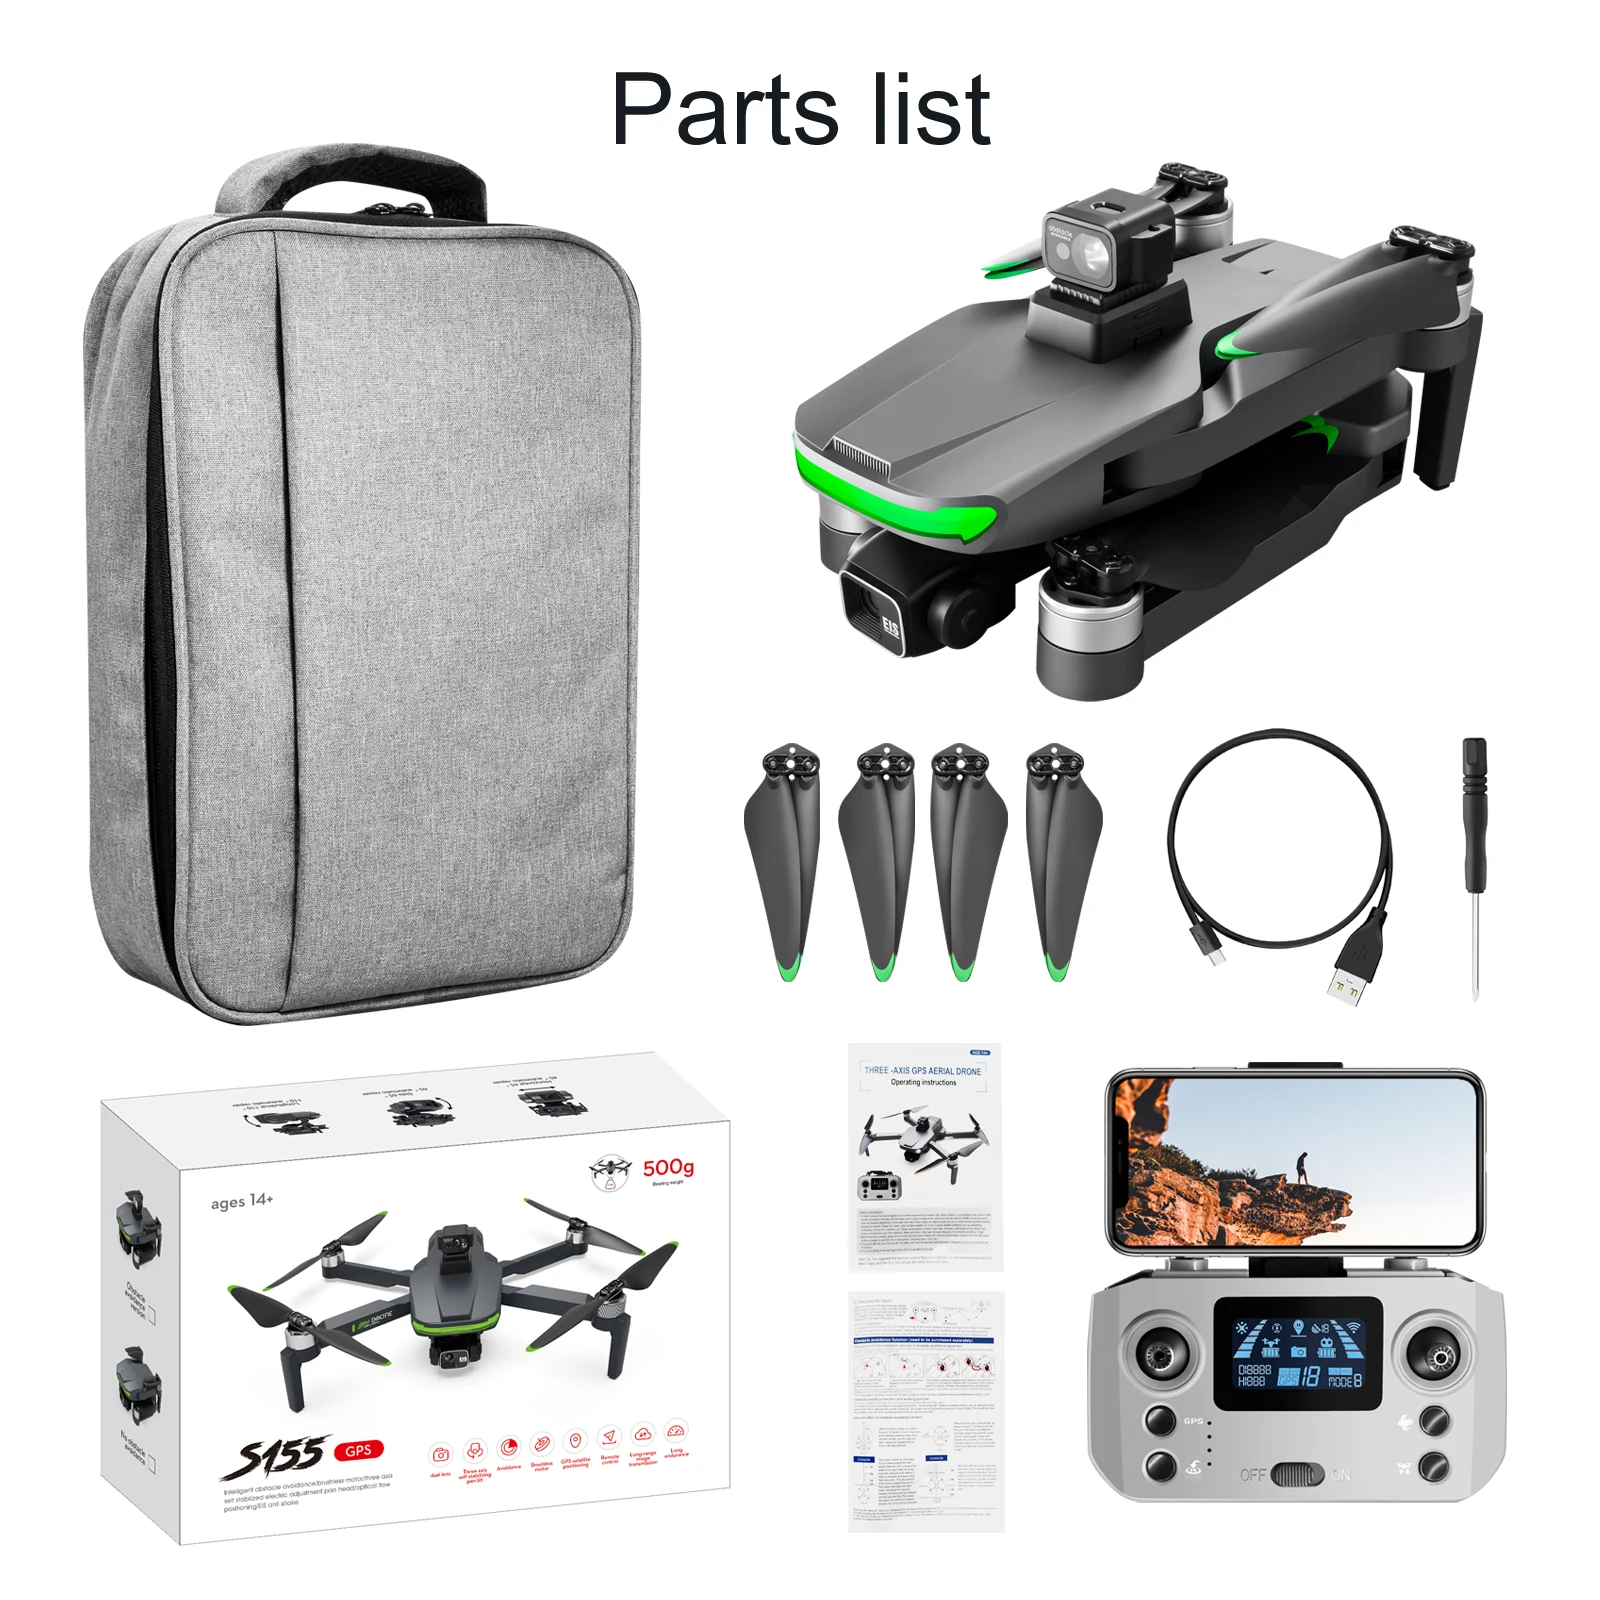 S155 Pro GPS Drone, Parts list Tmree AXis Gps AERIAL Drone Ce